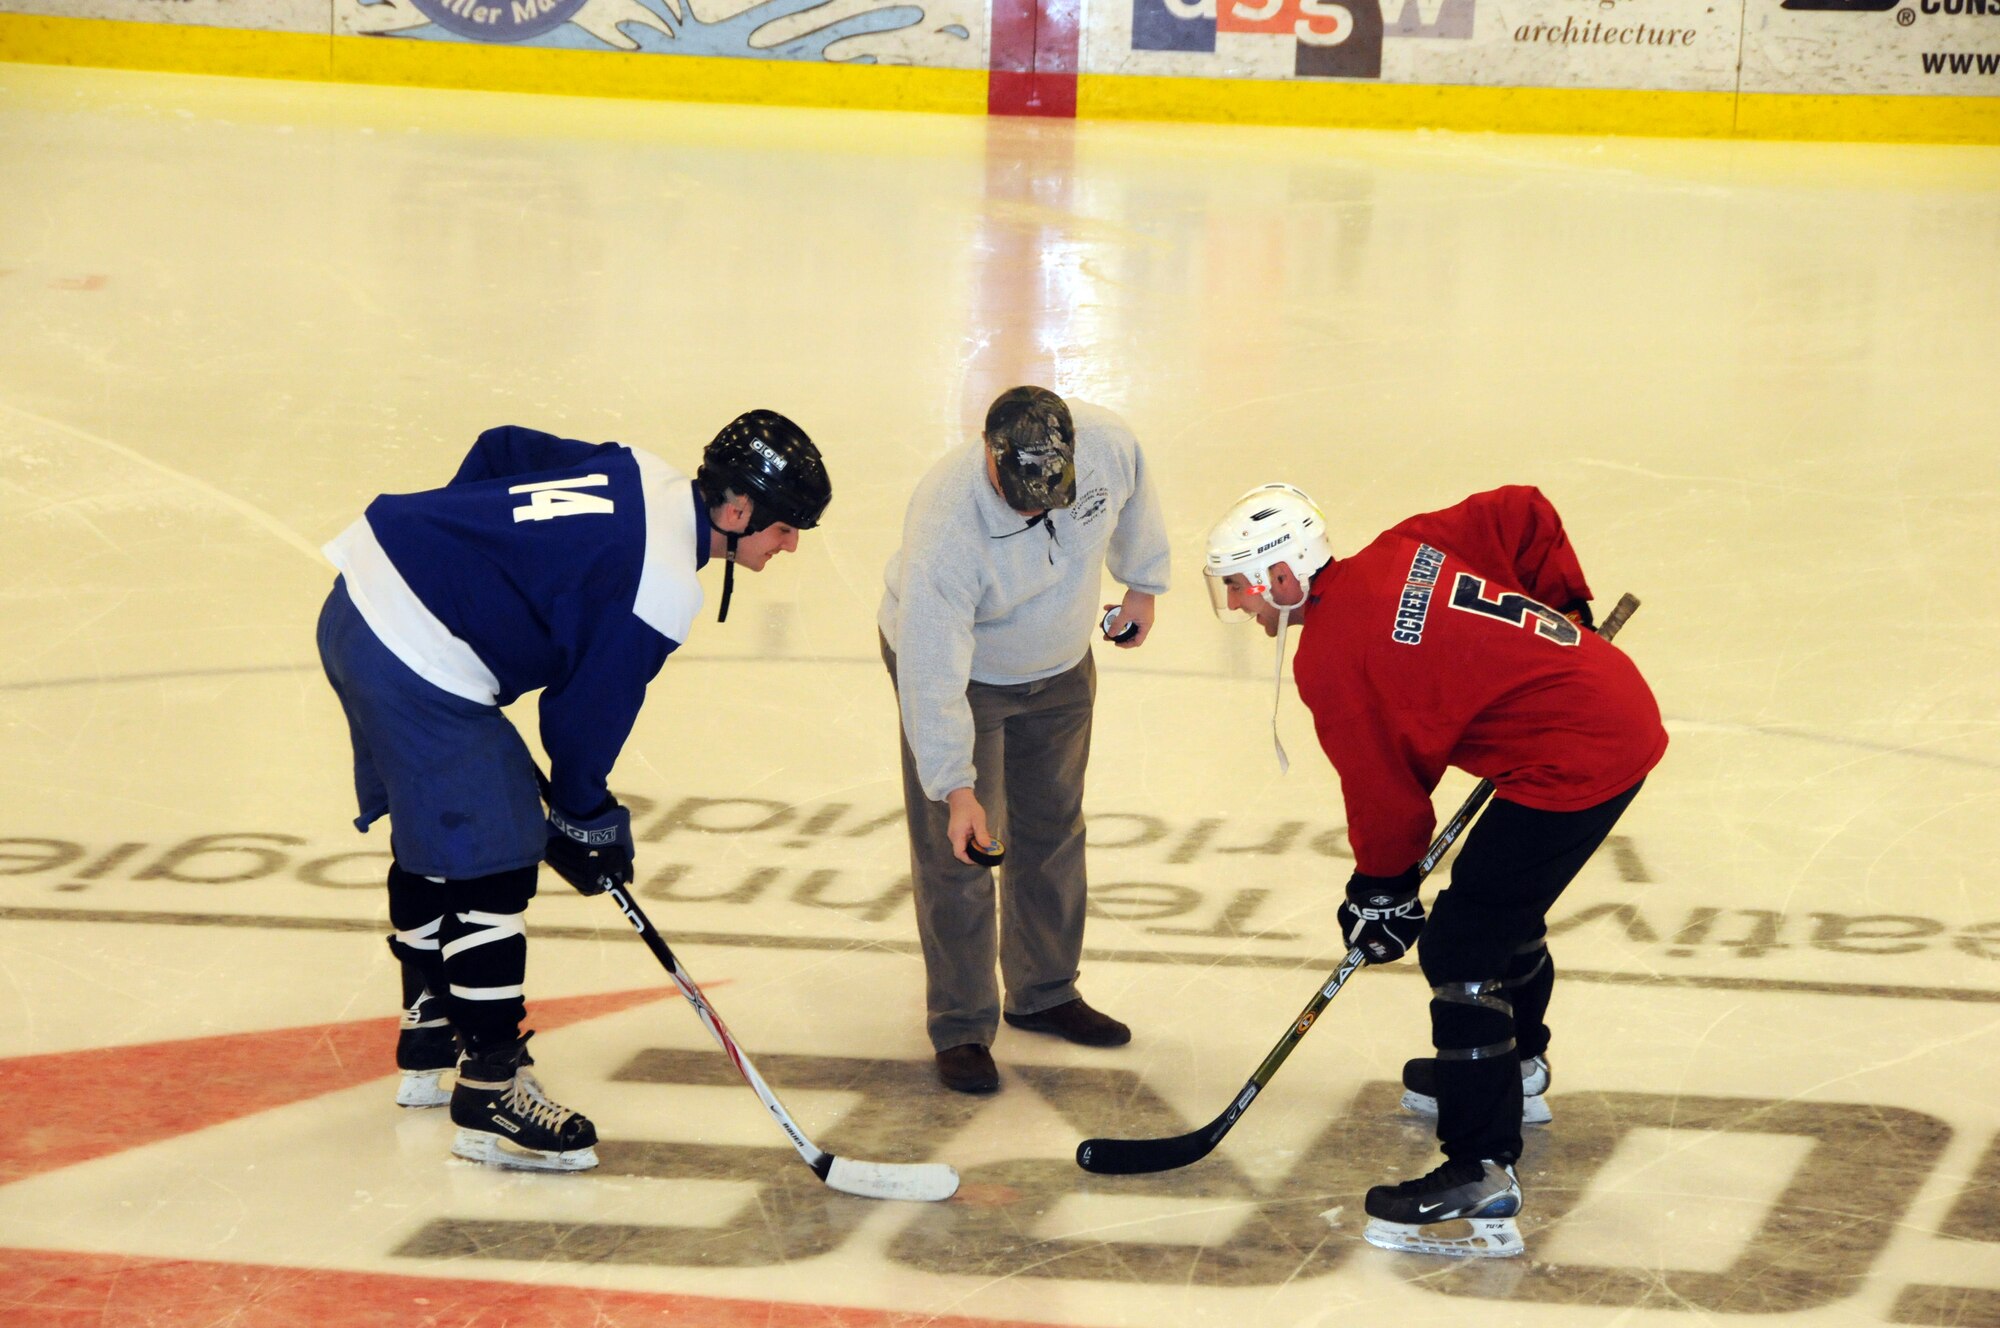 Col. Steven Wabrowetz,148th Fighter Wing, Maintenance Group Commander drops the ceremonial puck to signify the start of the Minnesota National Guard hockey tournament.  The tournament was held at the Duluth Heritage Sports Center in Duluth, Minn.  (U.S. Air Force photo by Master Sgt. Ralph J. Kapustka)